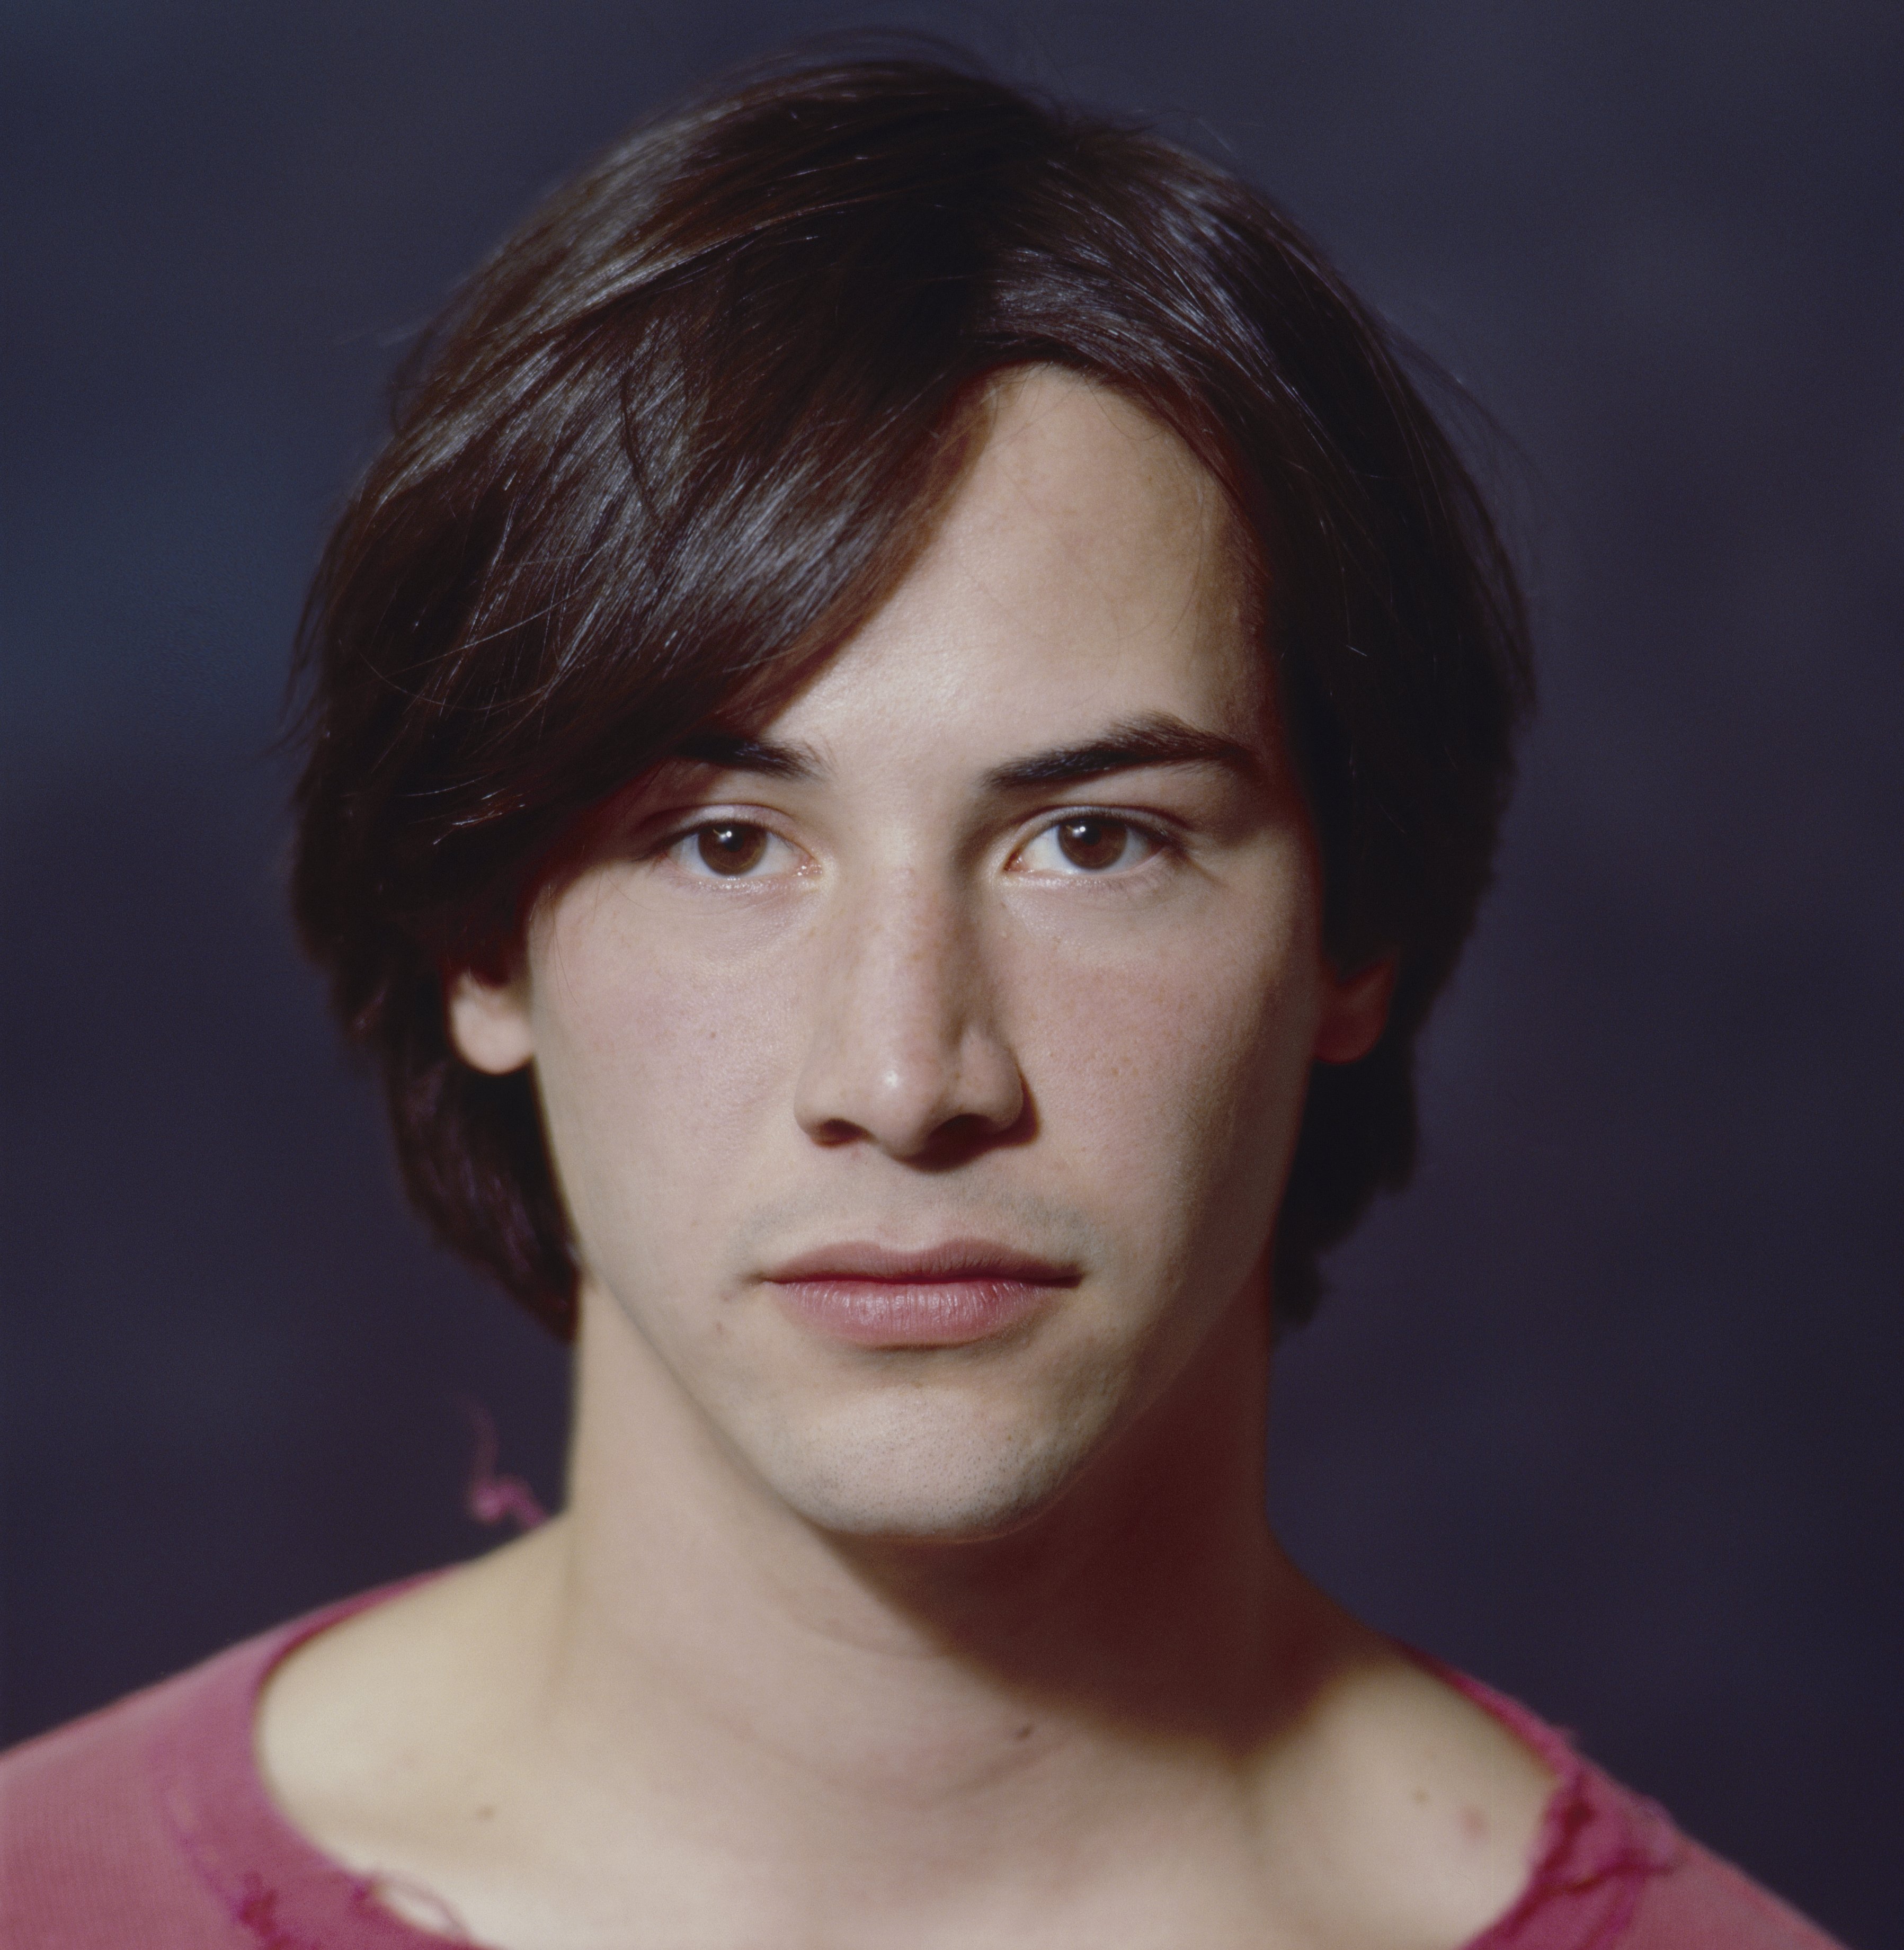 Keanu Reeves before filming "Bill and Ted's Excellent Adventure" in 1986. | Source: Getty Images